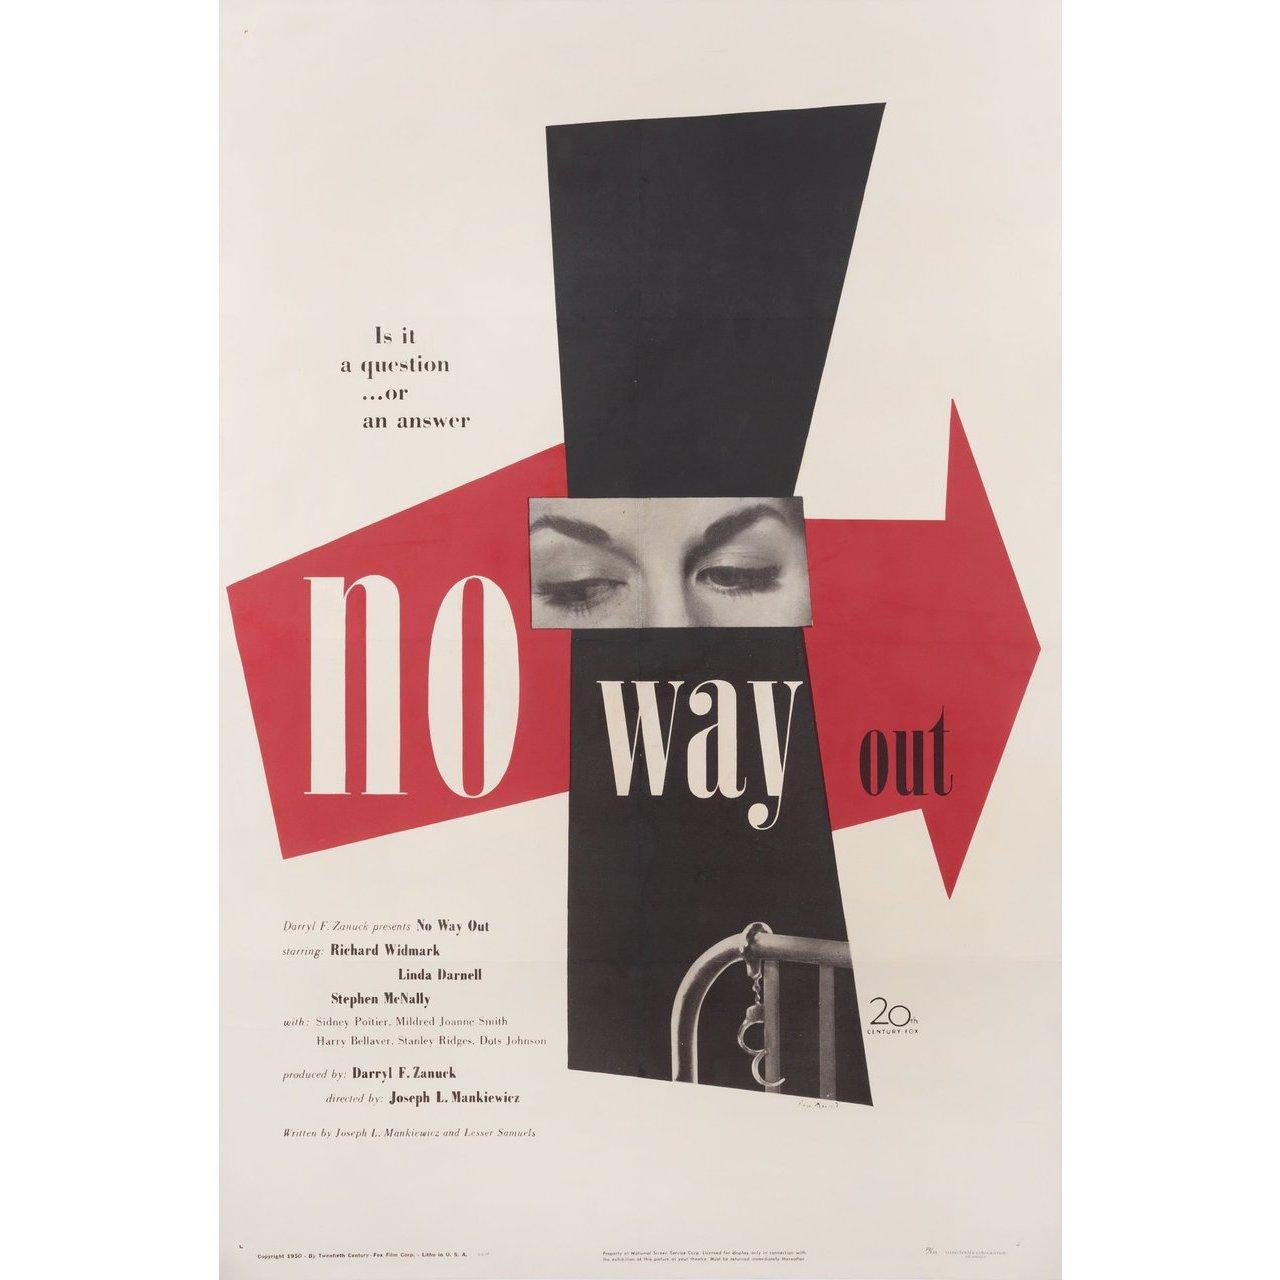 Original 1950 U.S. one sheet poster by Paul Rand for the film No Way Out directed by Joseph L. Mankiewicz with Richard Widmark / Linda Darnell / Stephen McNally / Sidney Poitier. Fine condition, folded. Many original posters were issued folded or